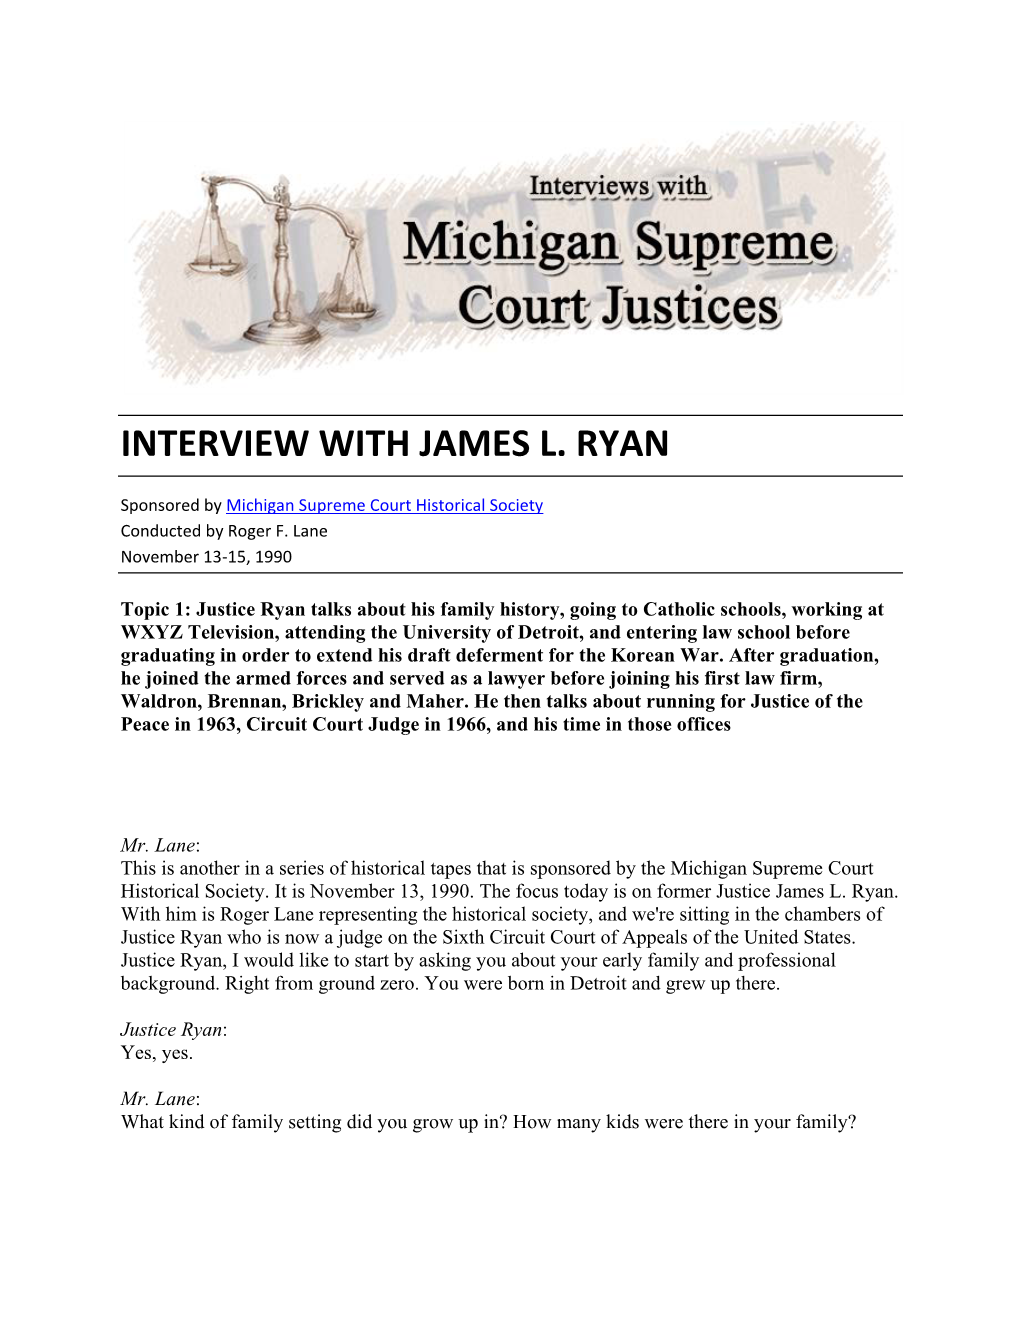 Interview with James L. Ryan